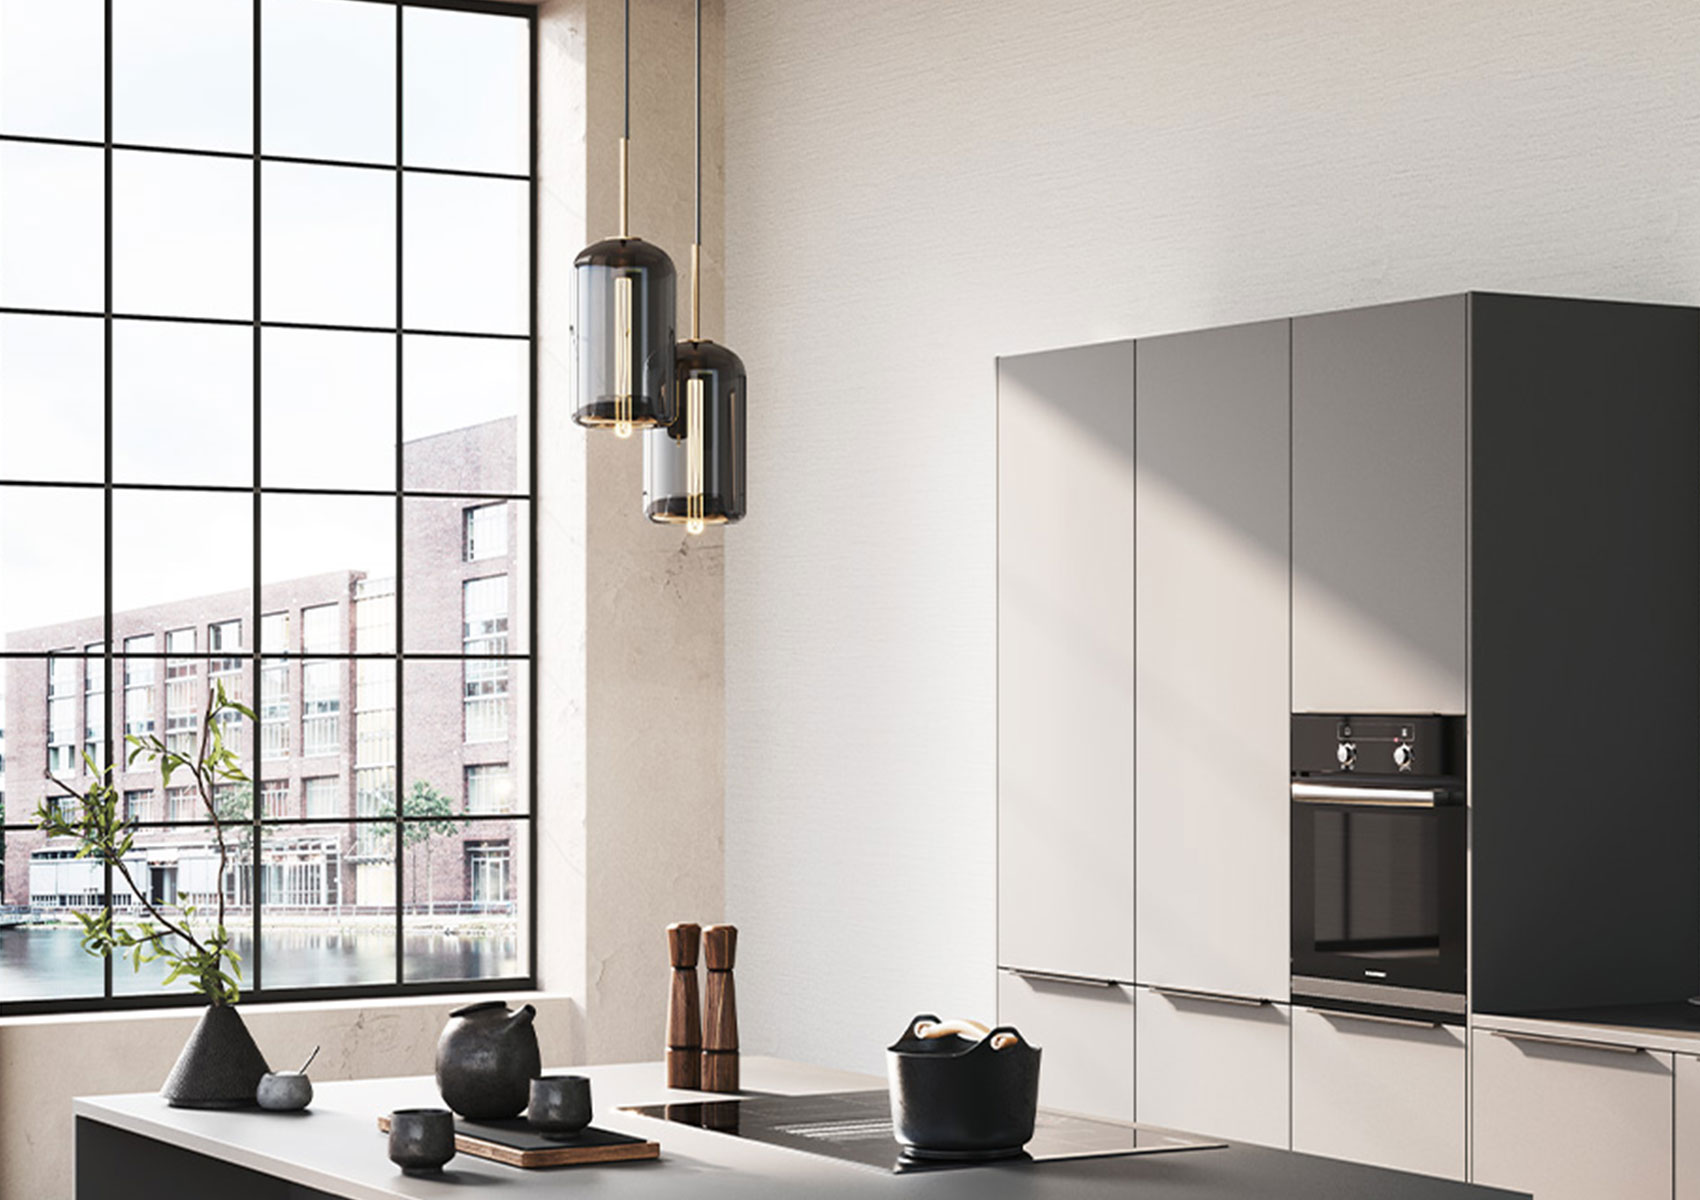 Tall cabinets in TOP SOFT Graphite with BLAUPUNKT built-in oven.